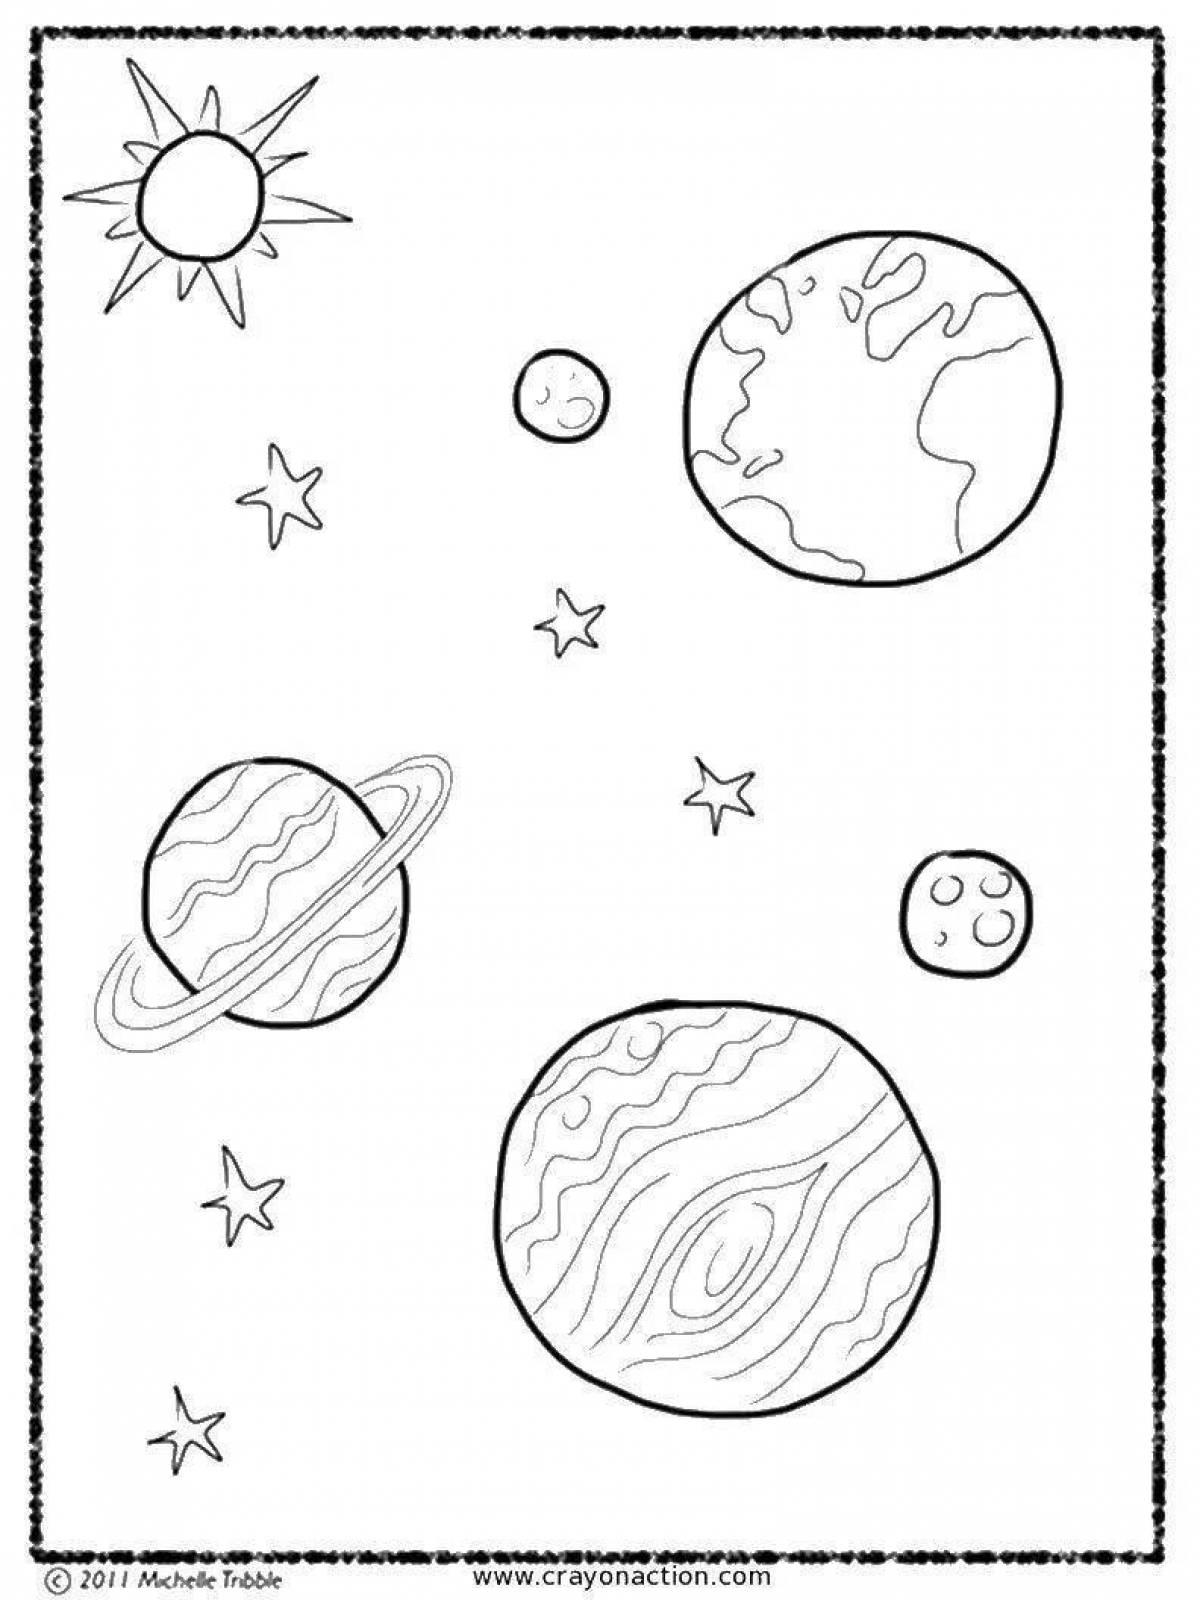 Terrific coloring of the planet space